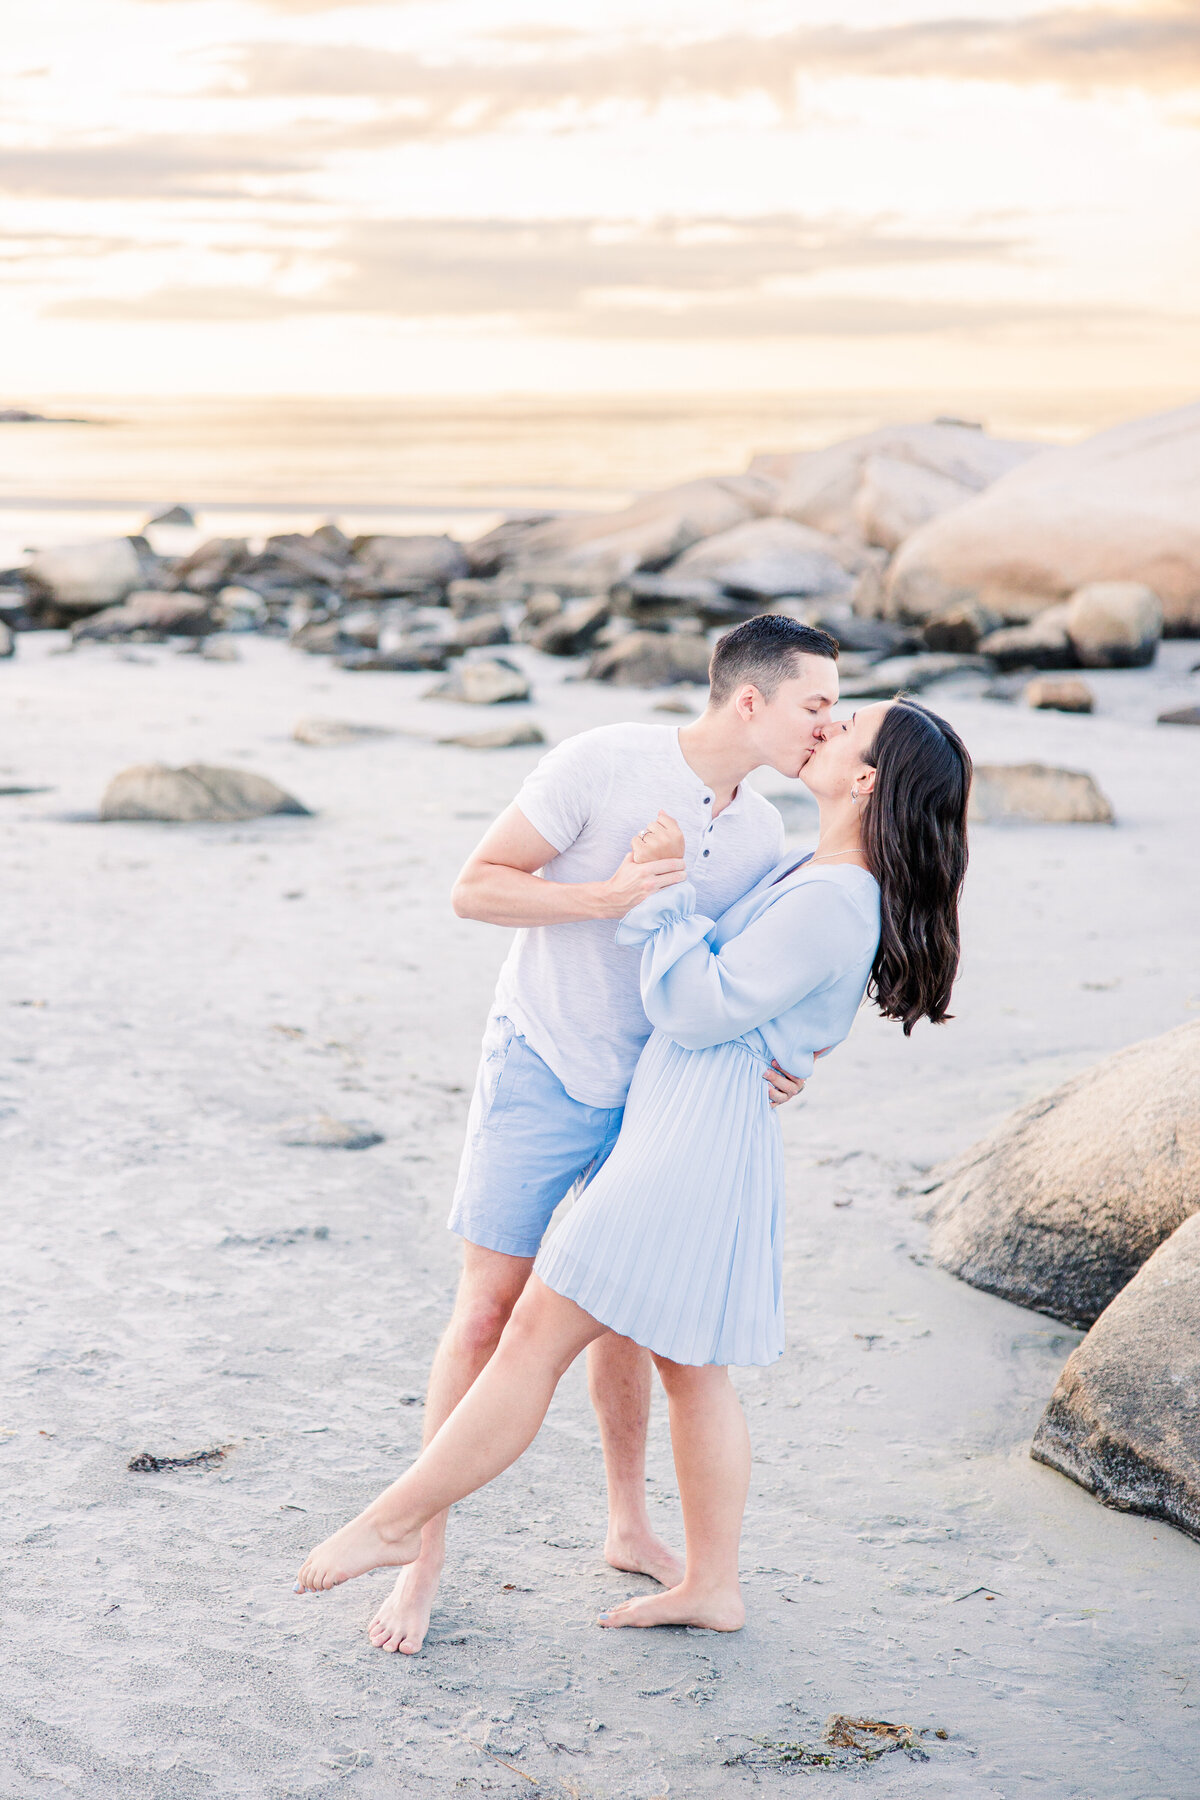 Man dipping and kissing a woman representing romantic MA beach engagement photos